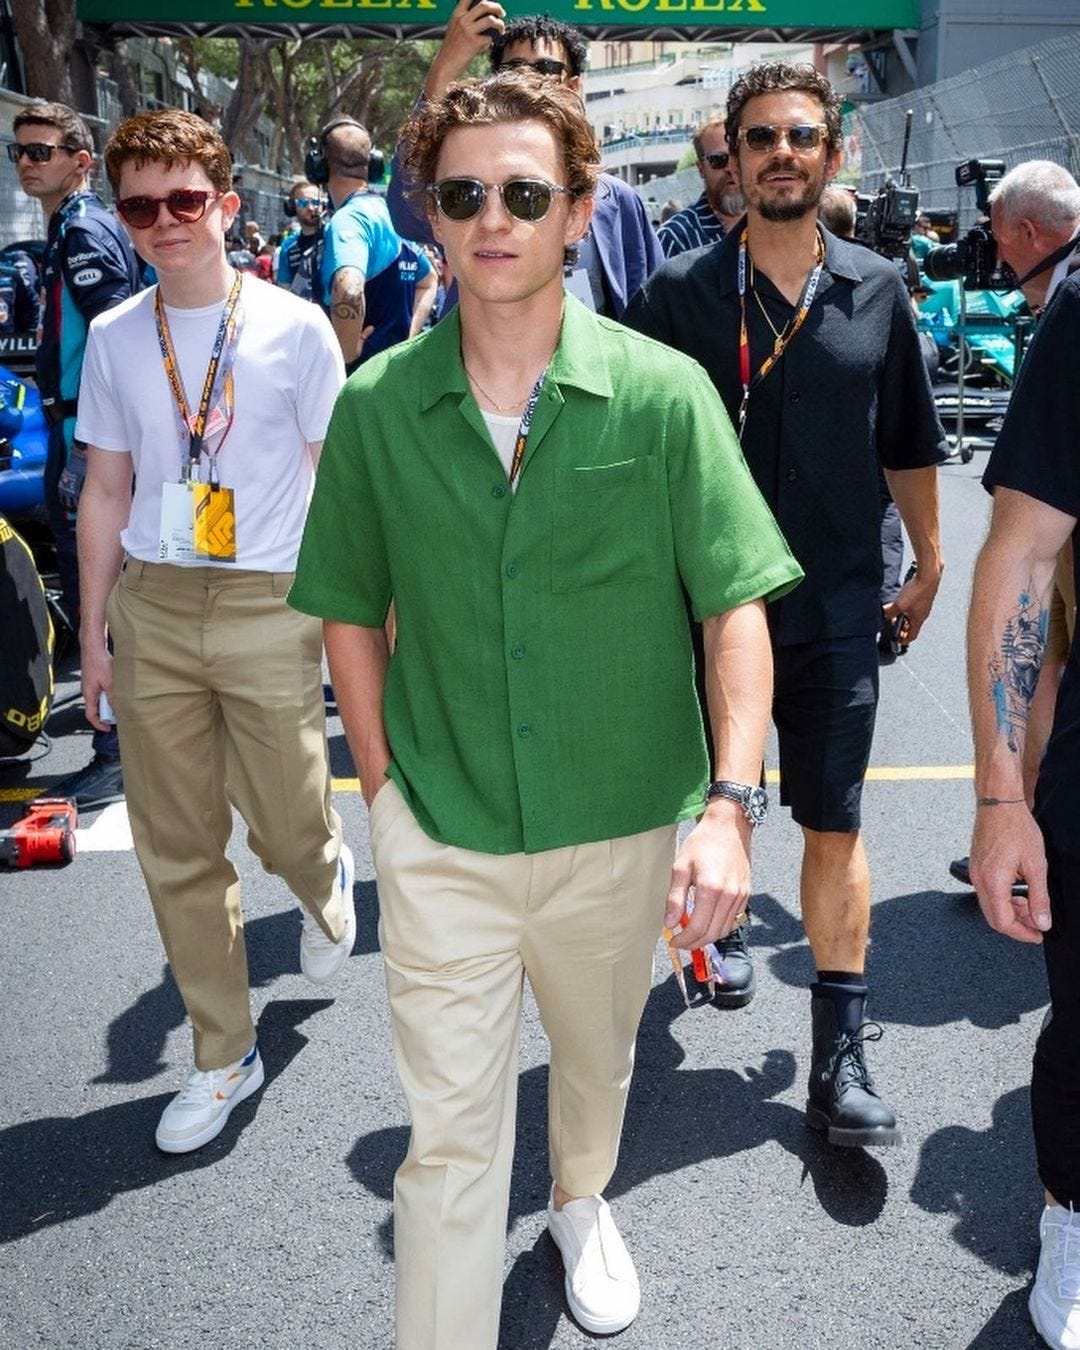 tom holland in a crowd, wearing a green shirt, khaki pants, and white sneakers